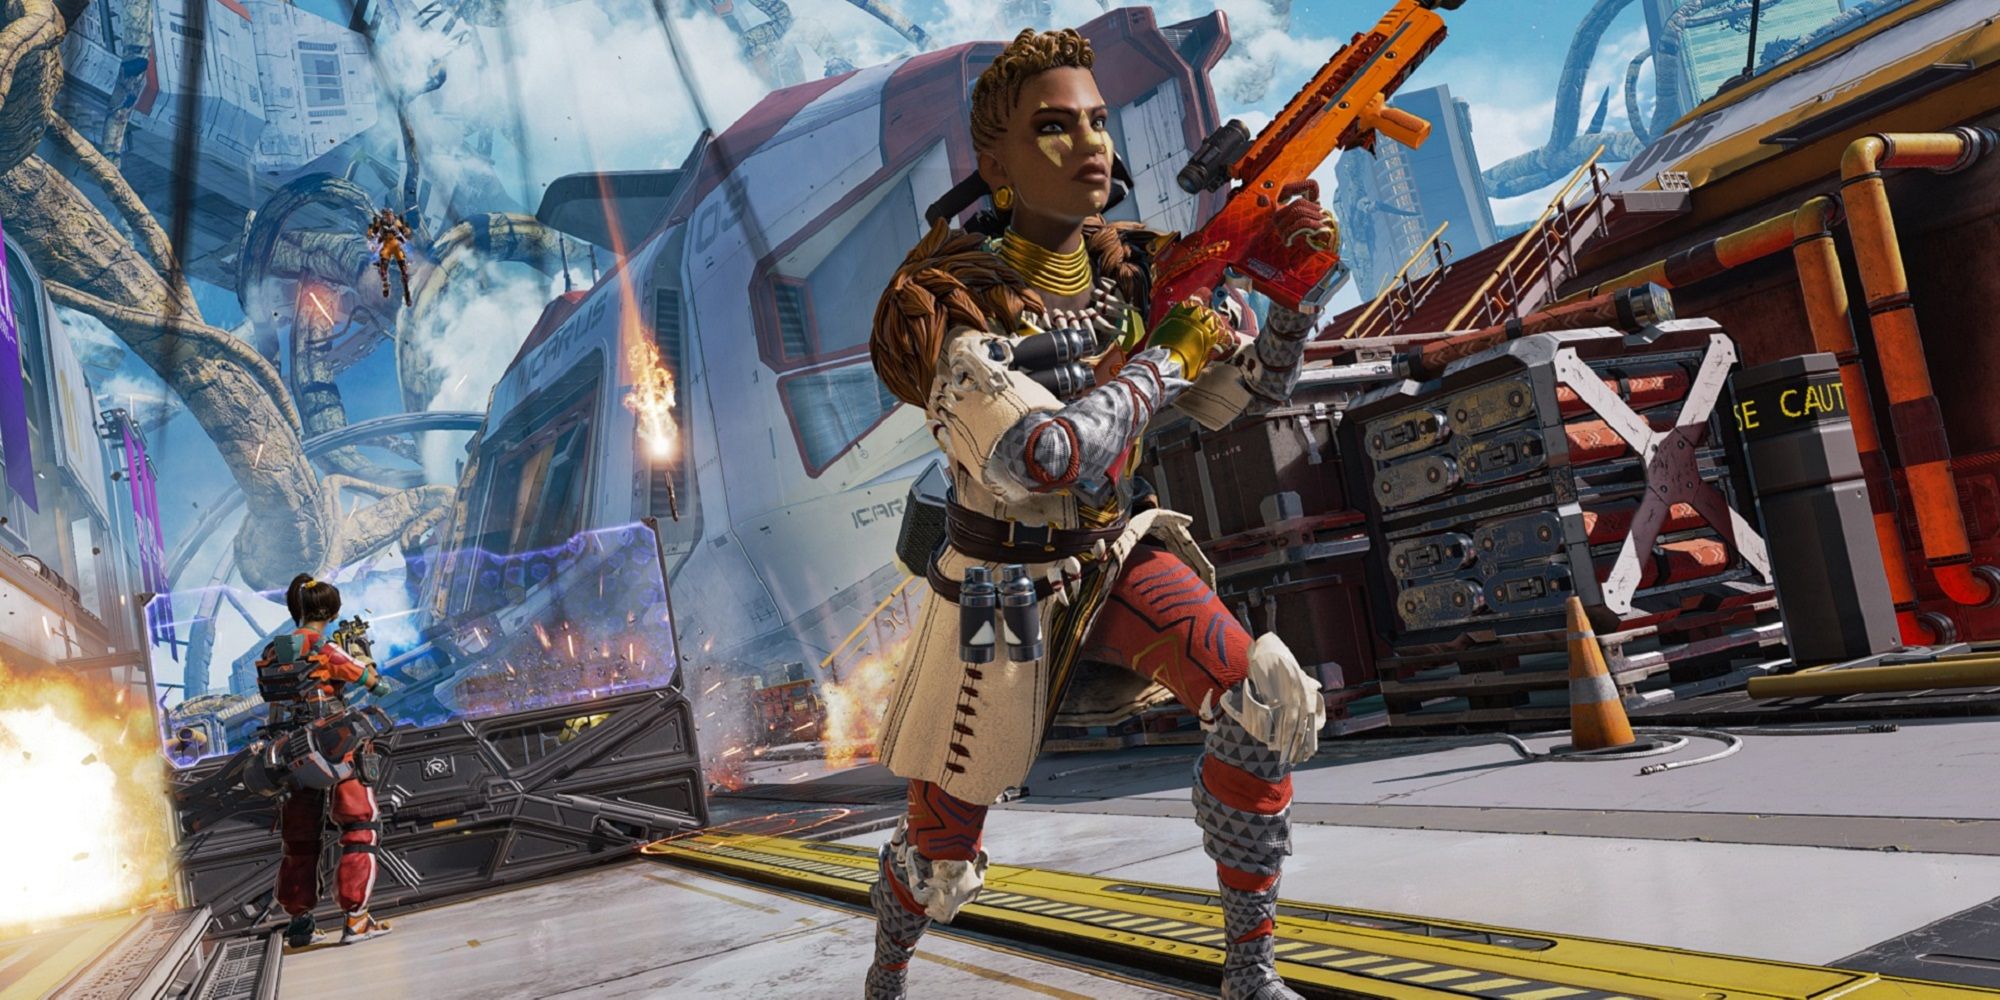 Apex Legends Bangalore Finale Shows That Battle Royales Can Be Emotional, Too 